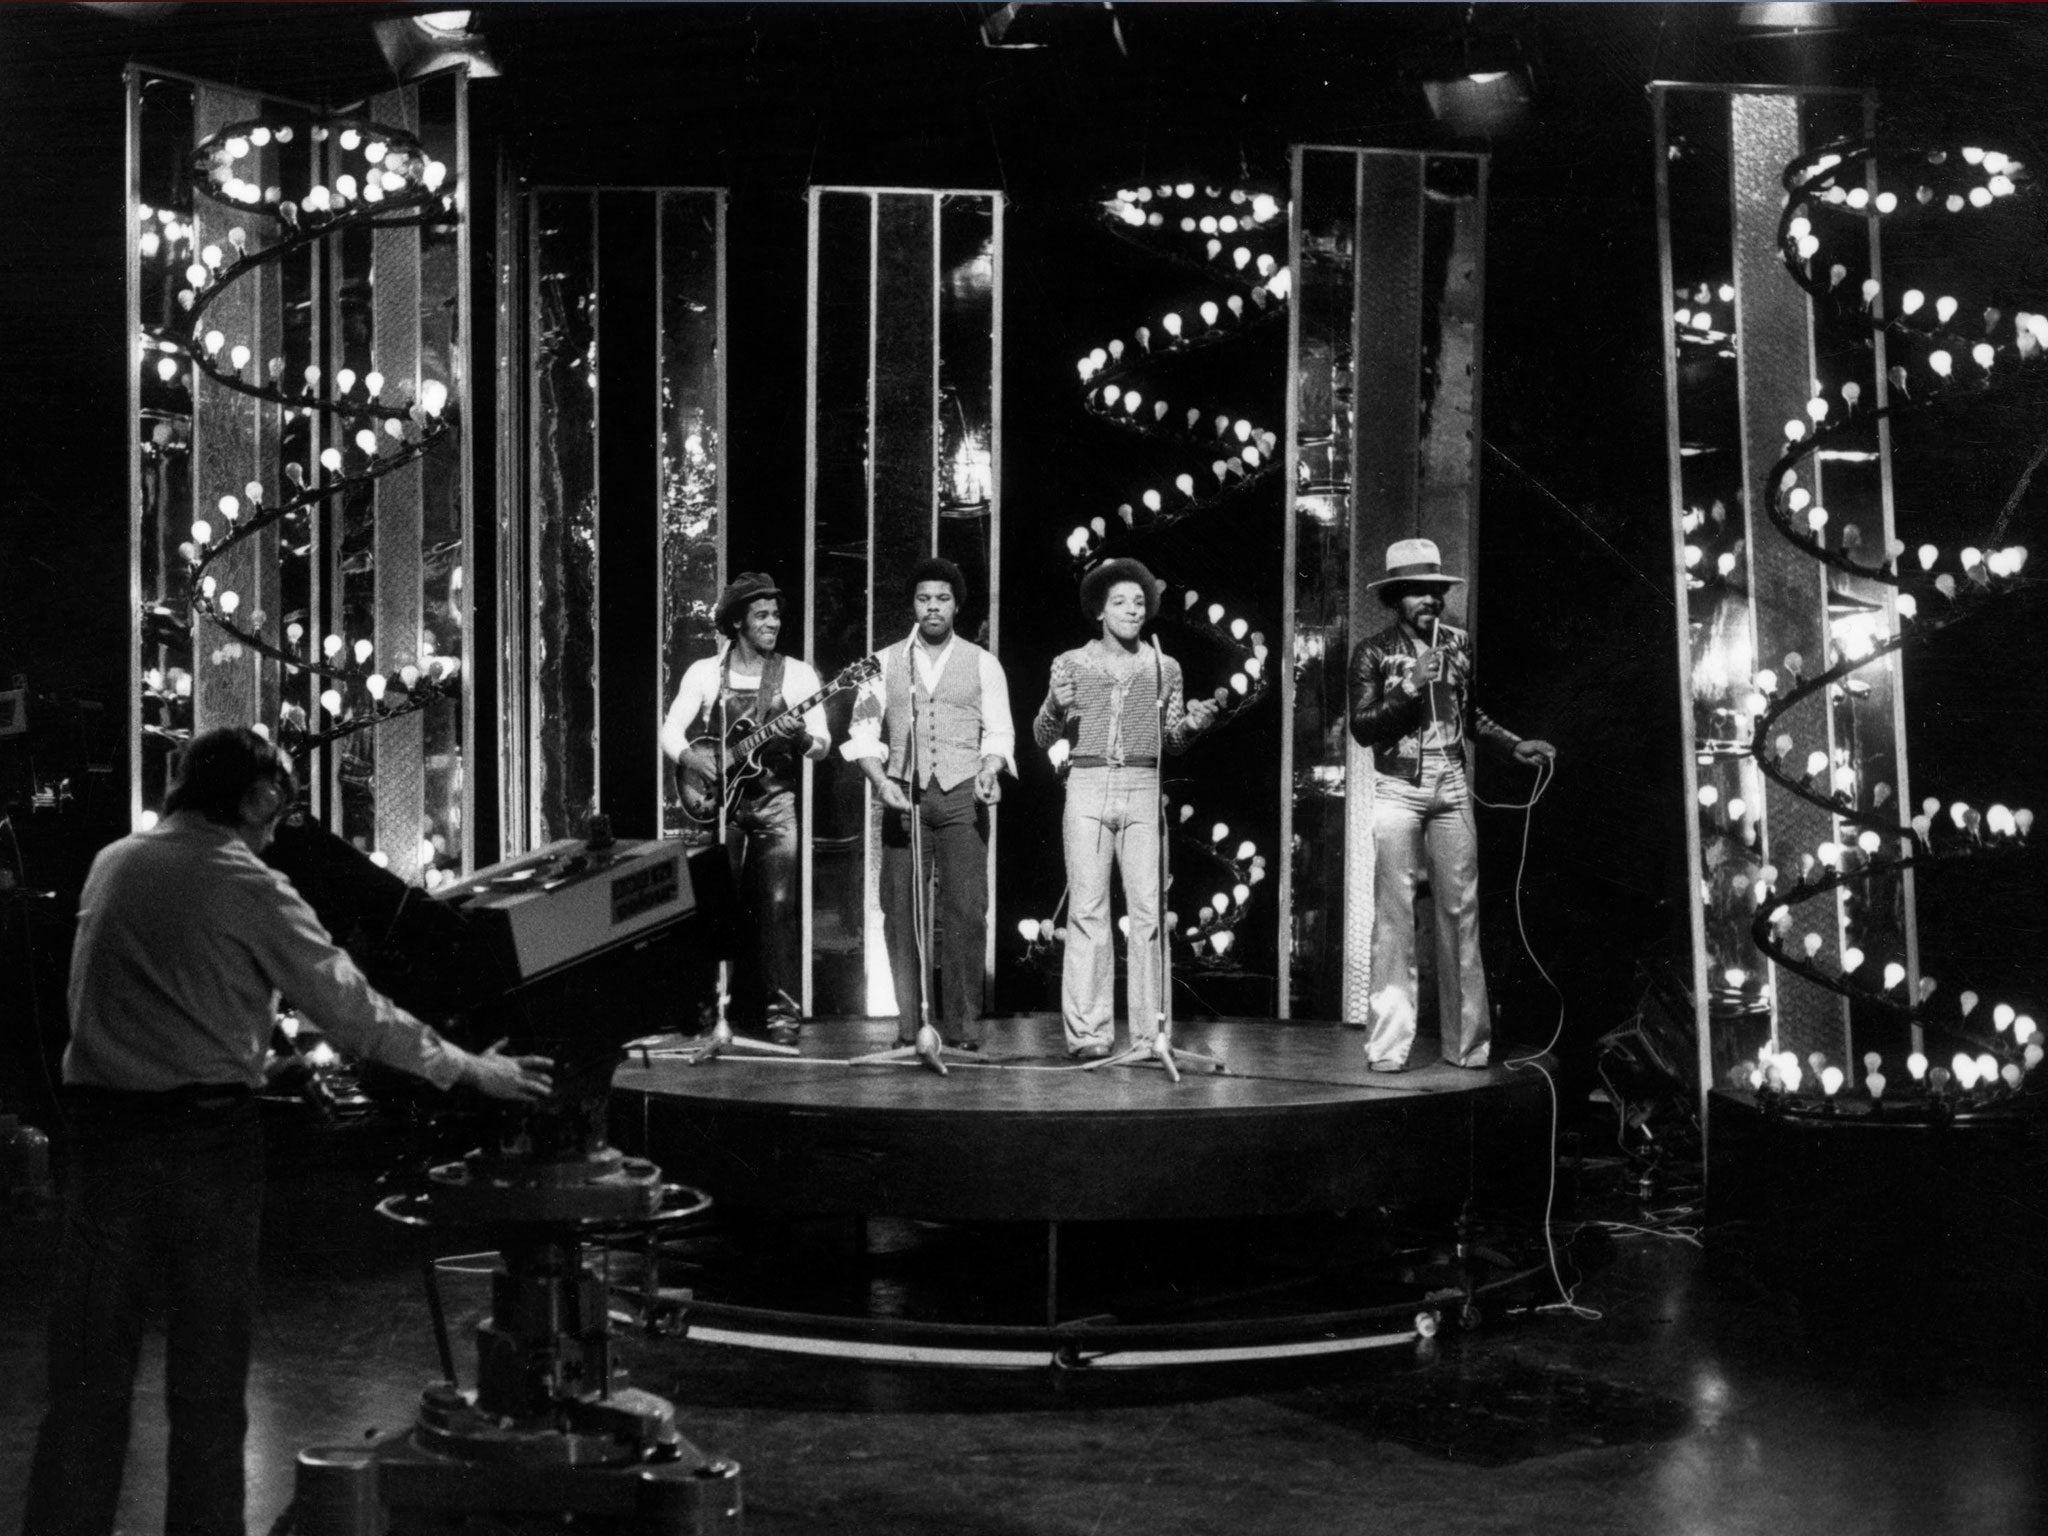 The Real Thing with lead singer Eddy Amoo performing in 'Top of the Pops' in 1978